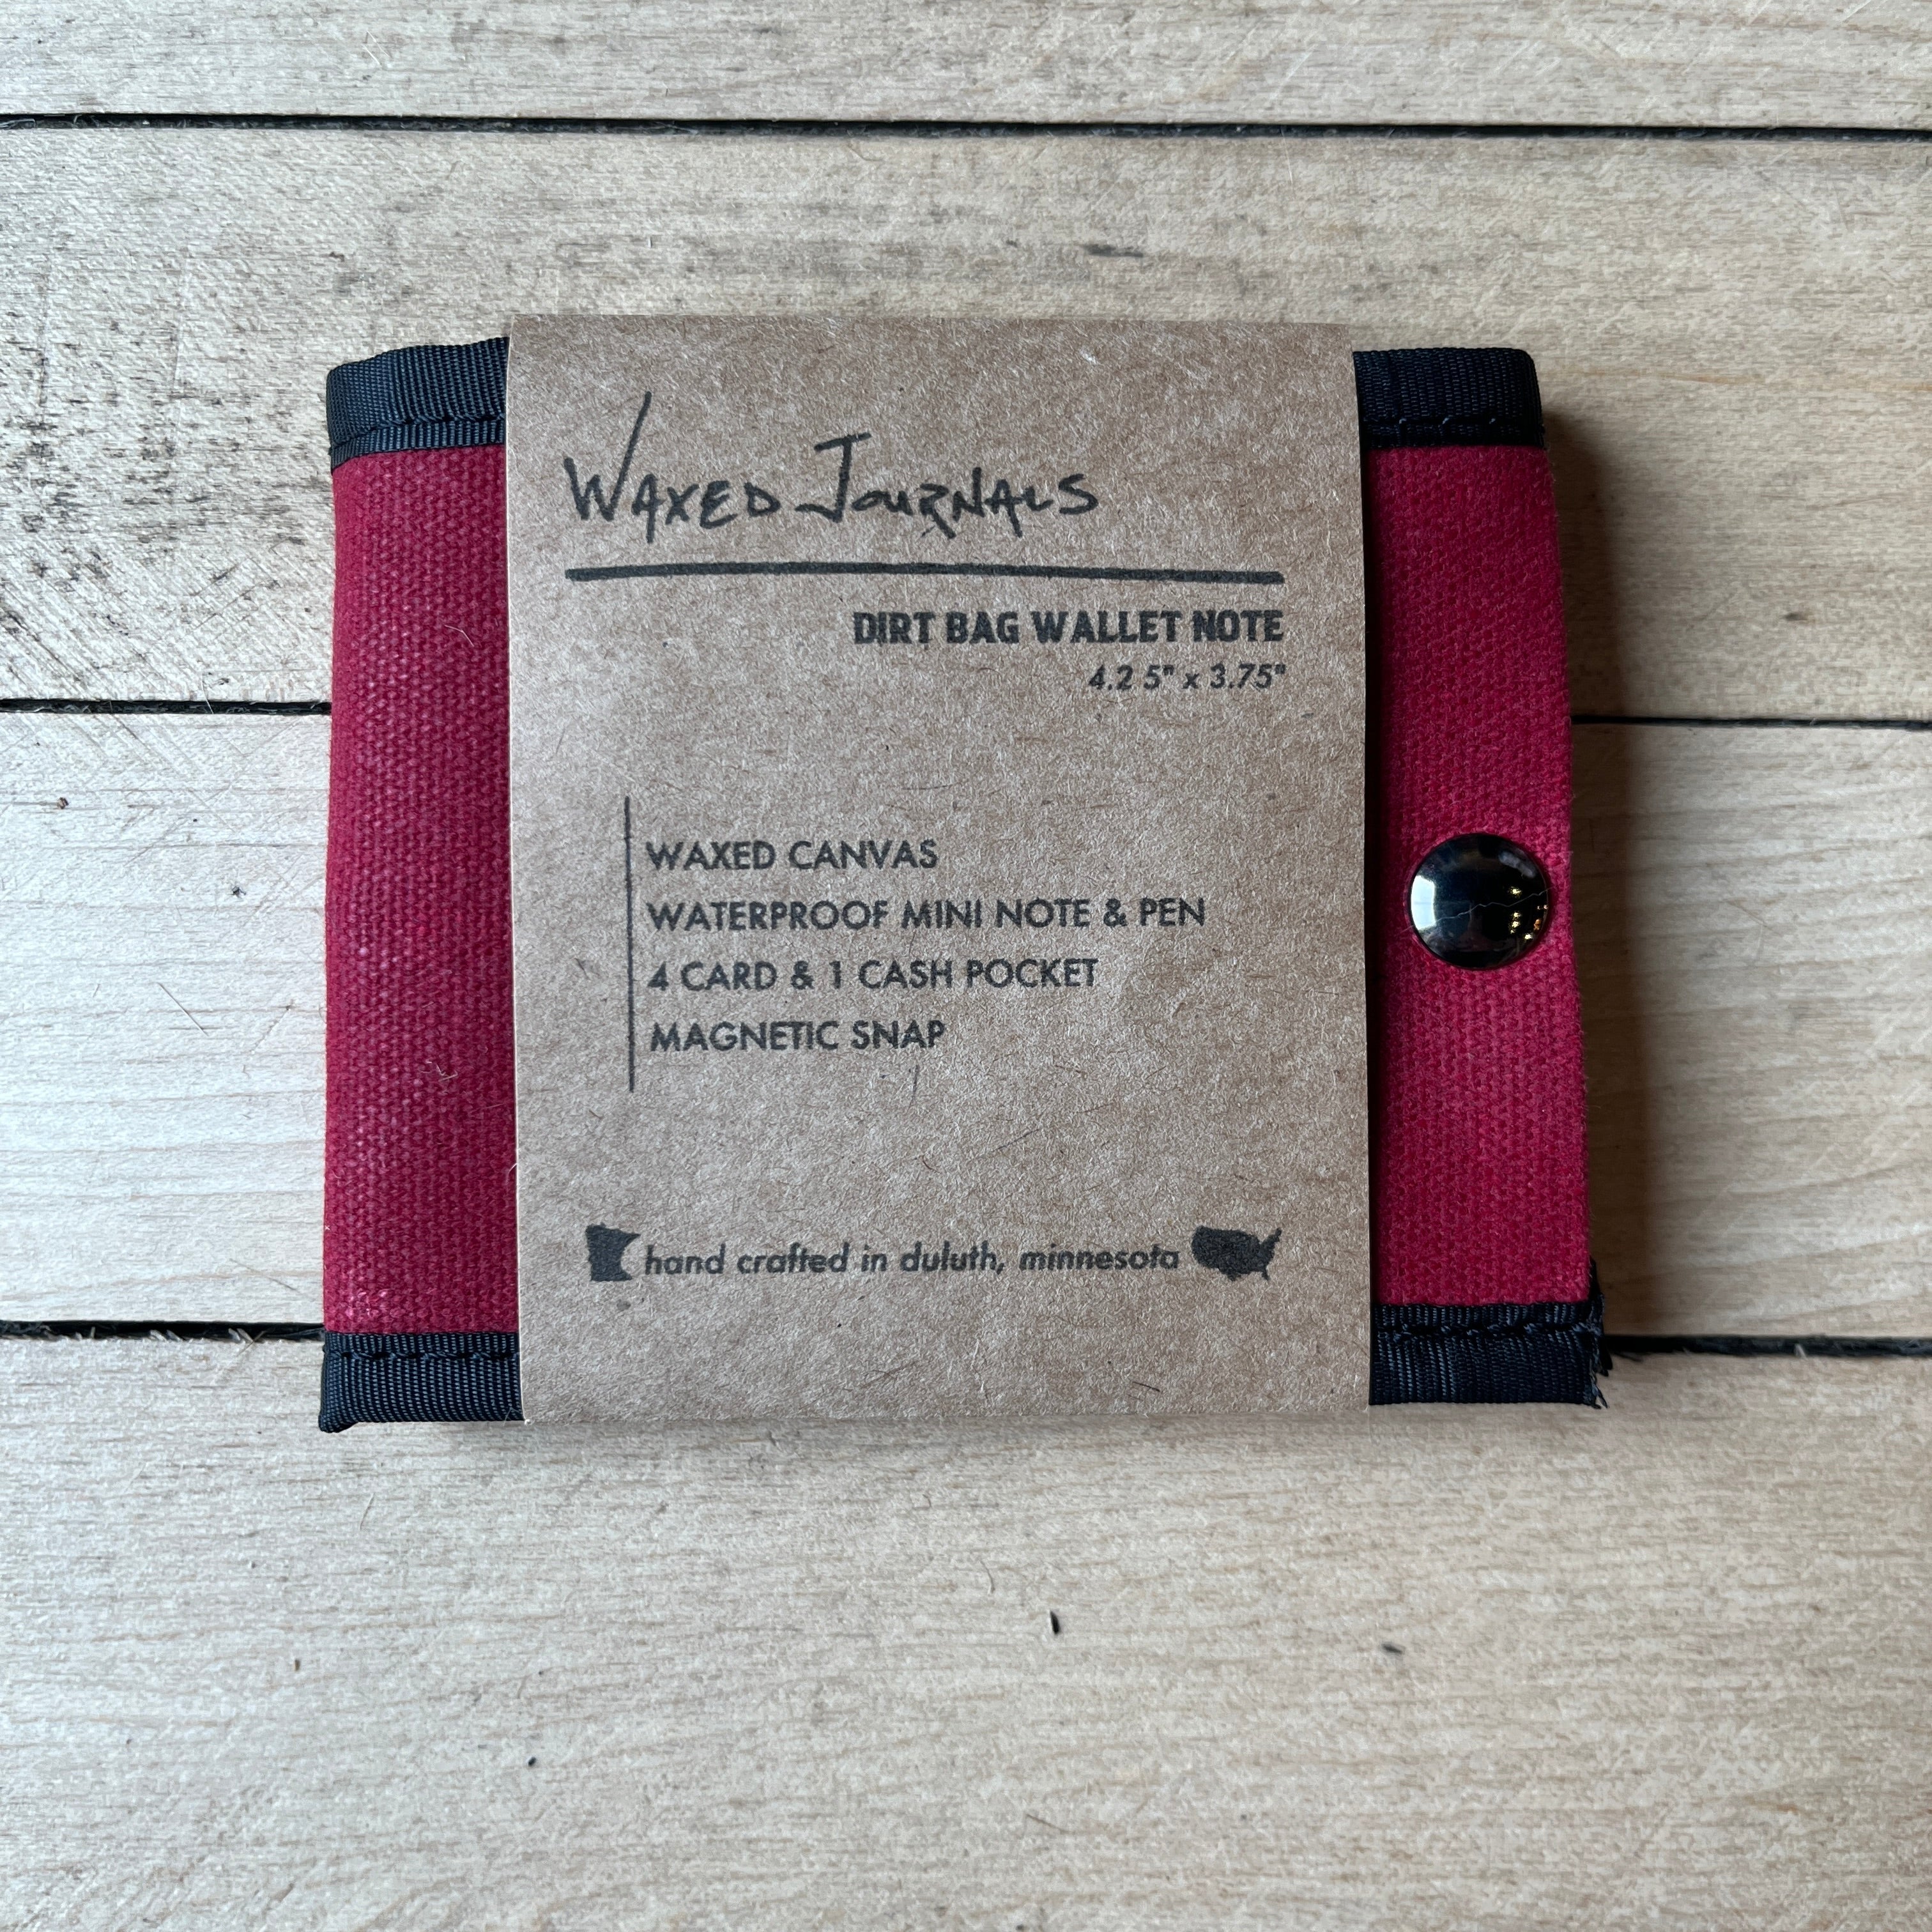 Dirt Bag Wallet Note by Waxed Journals